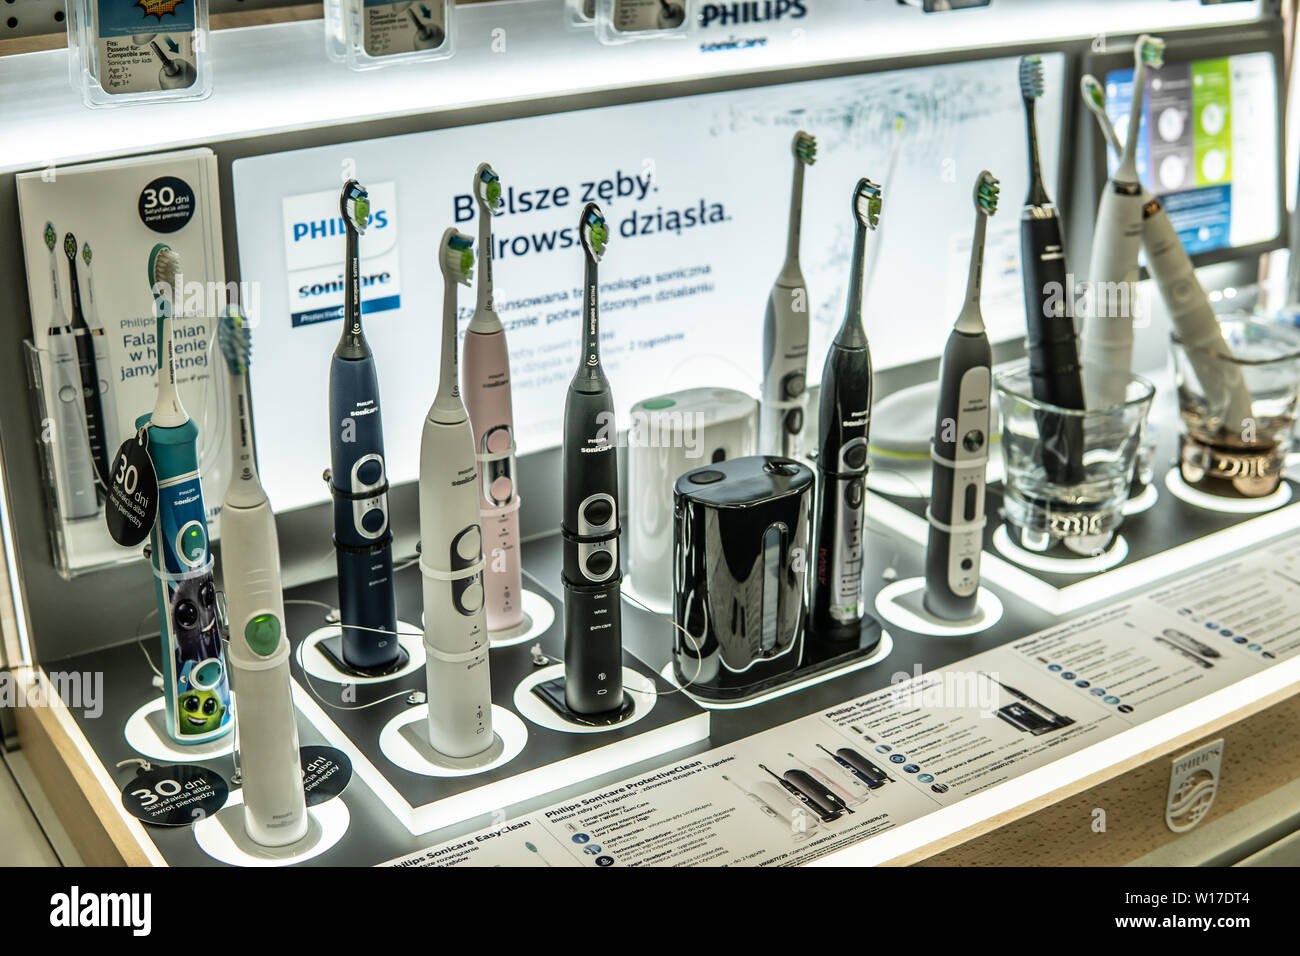 Lodz, Poland, July 9, 2018 inside Saturn electronic store, Philips Sonicare  ProtectiveClean electric toothbrush on display for sale Stock Photo - Alamy